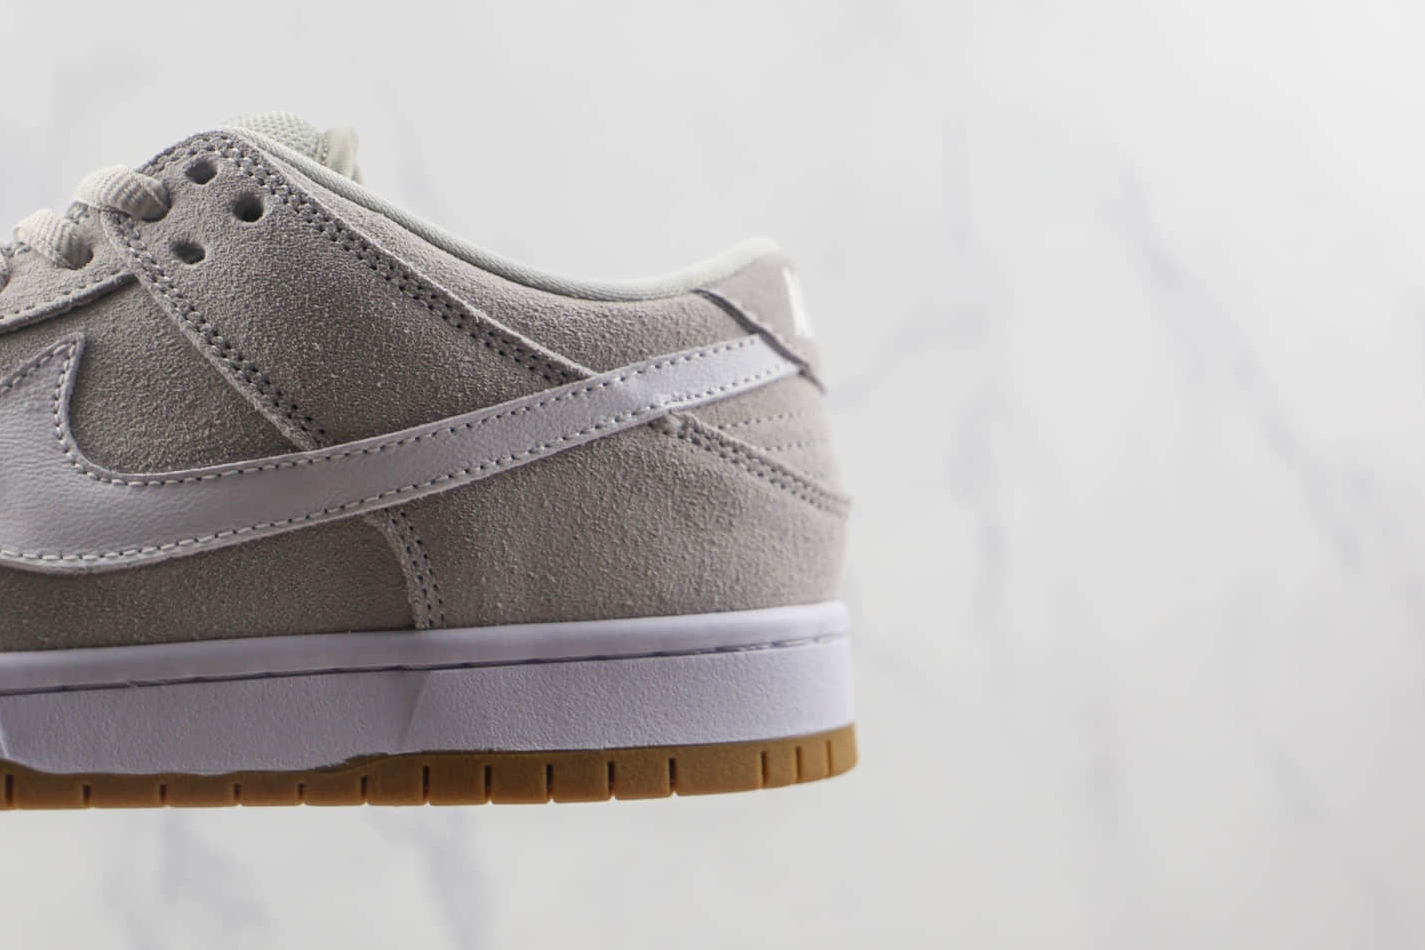 Nike SB Dunk Low Grey White Brown 304292-106 - Stylish and Comfortable Skate Shoes